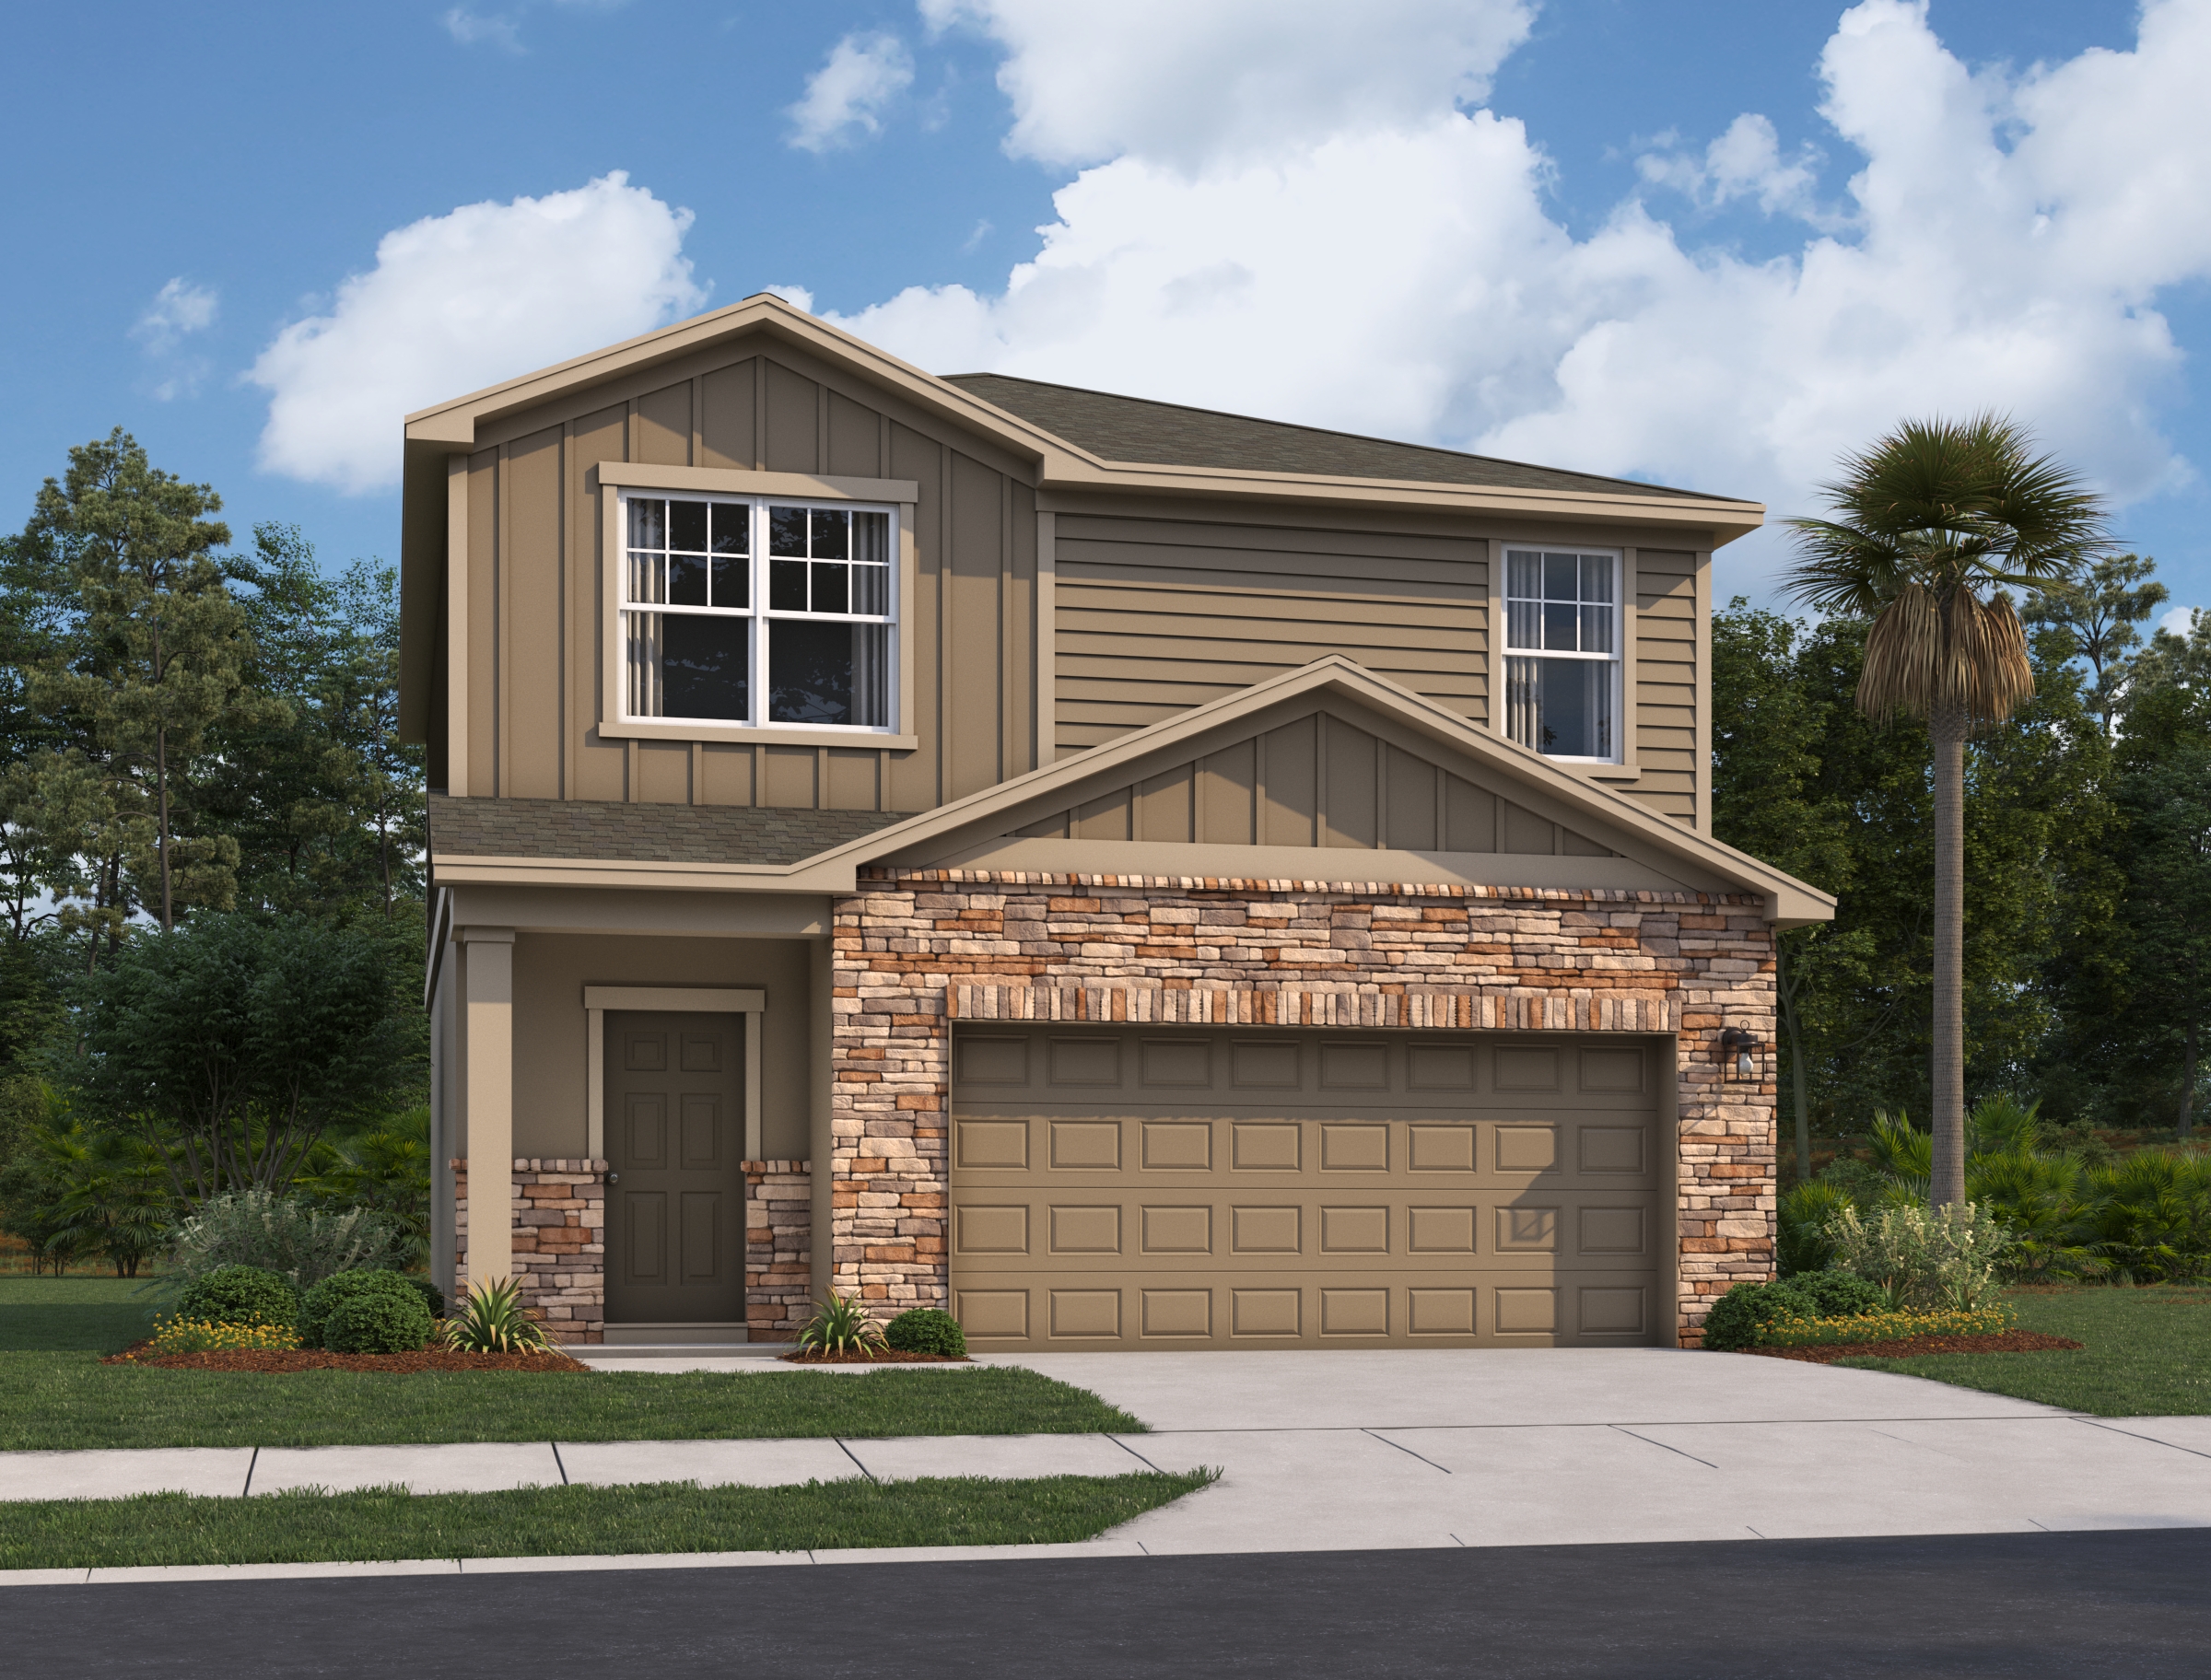 Check out our Endeavor plan in our Groveland, FL new home neighborhood, Phillips Landing!